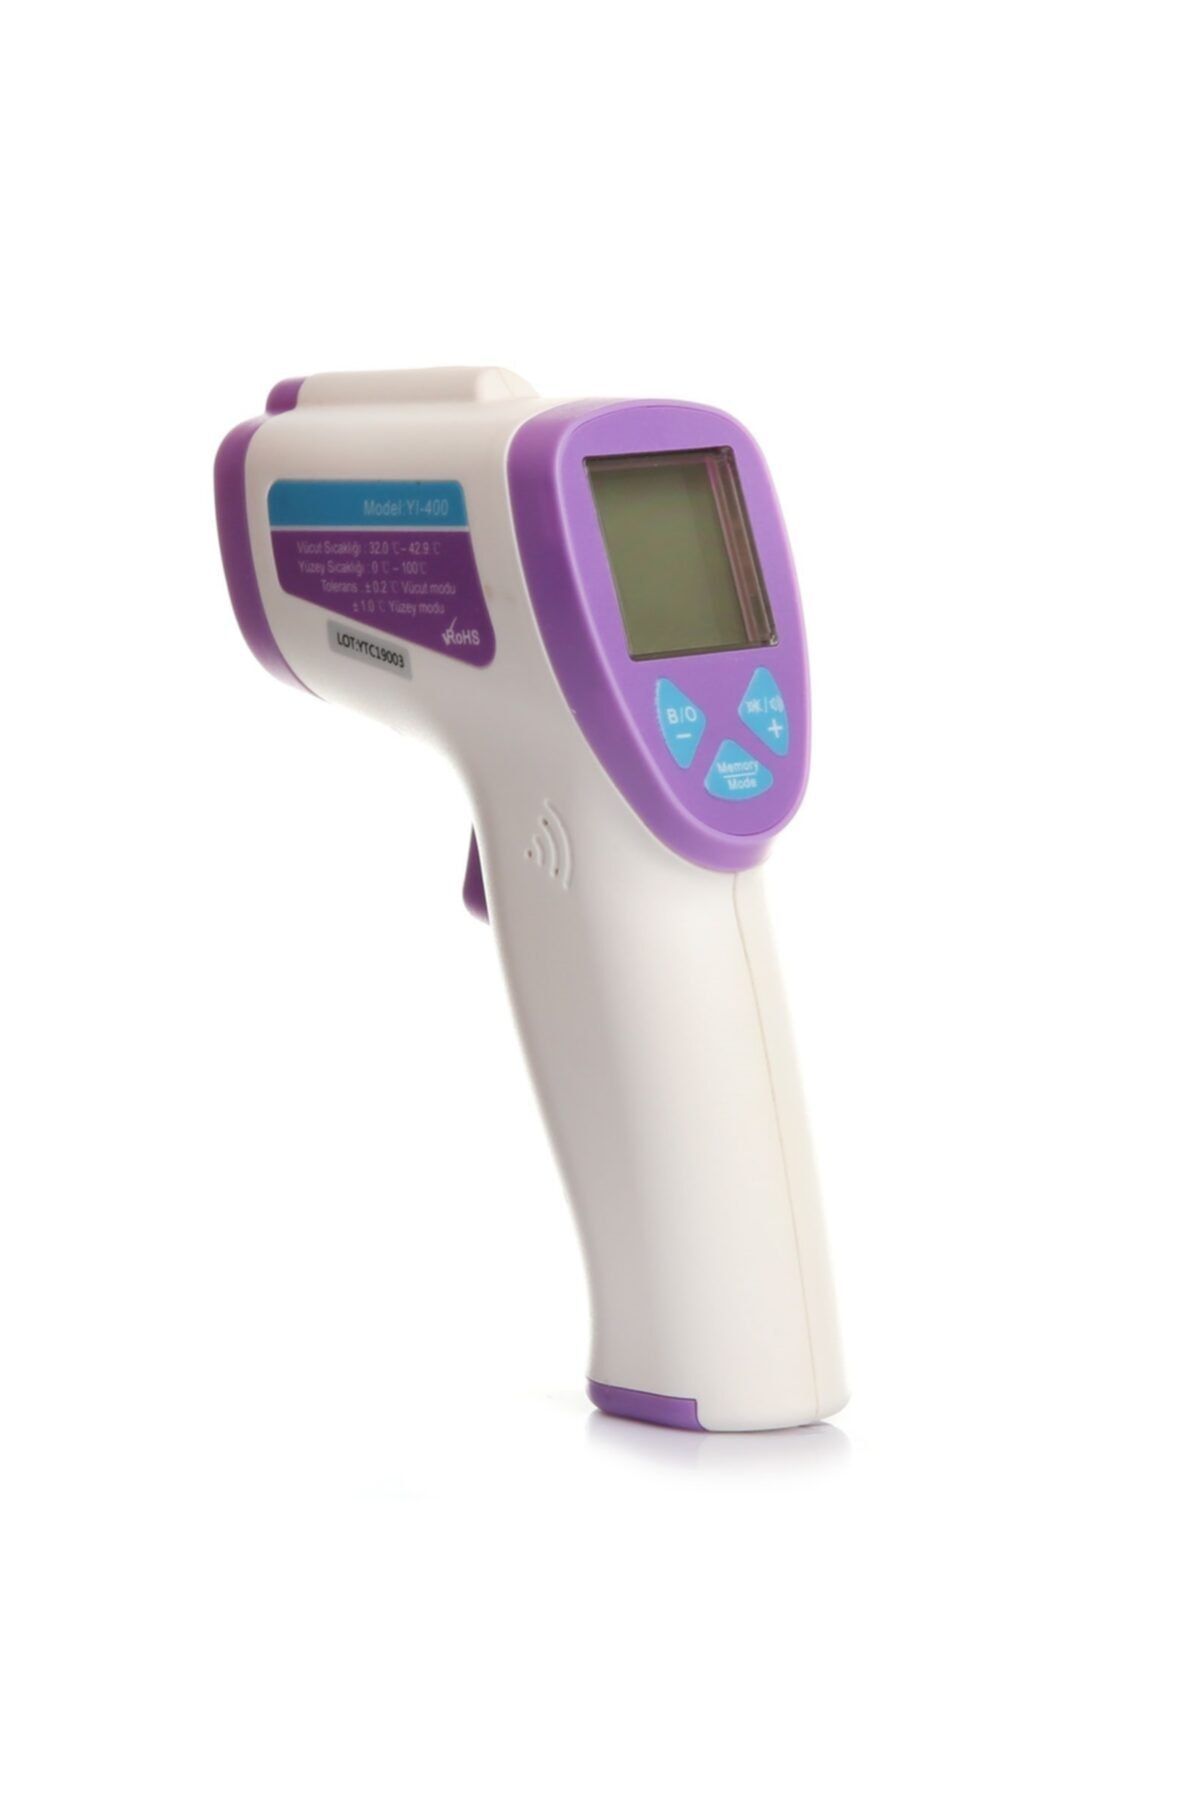 Infrared Thermometer - Dromex - Hand-Held Digital Thermometer